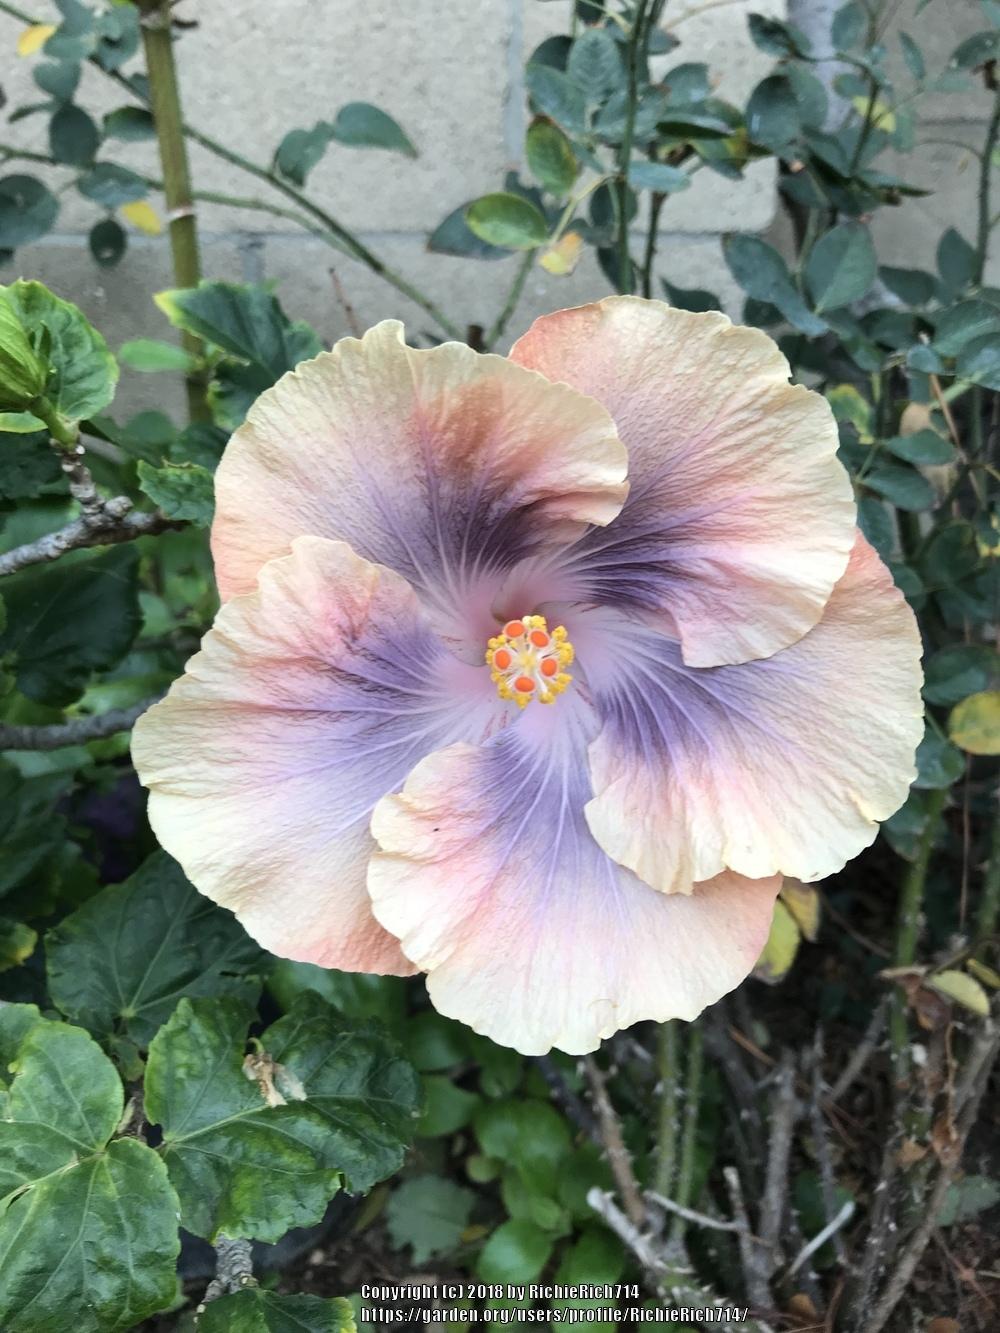 Photo of Hibiscus uploaded by RichieRich714